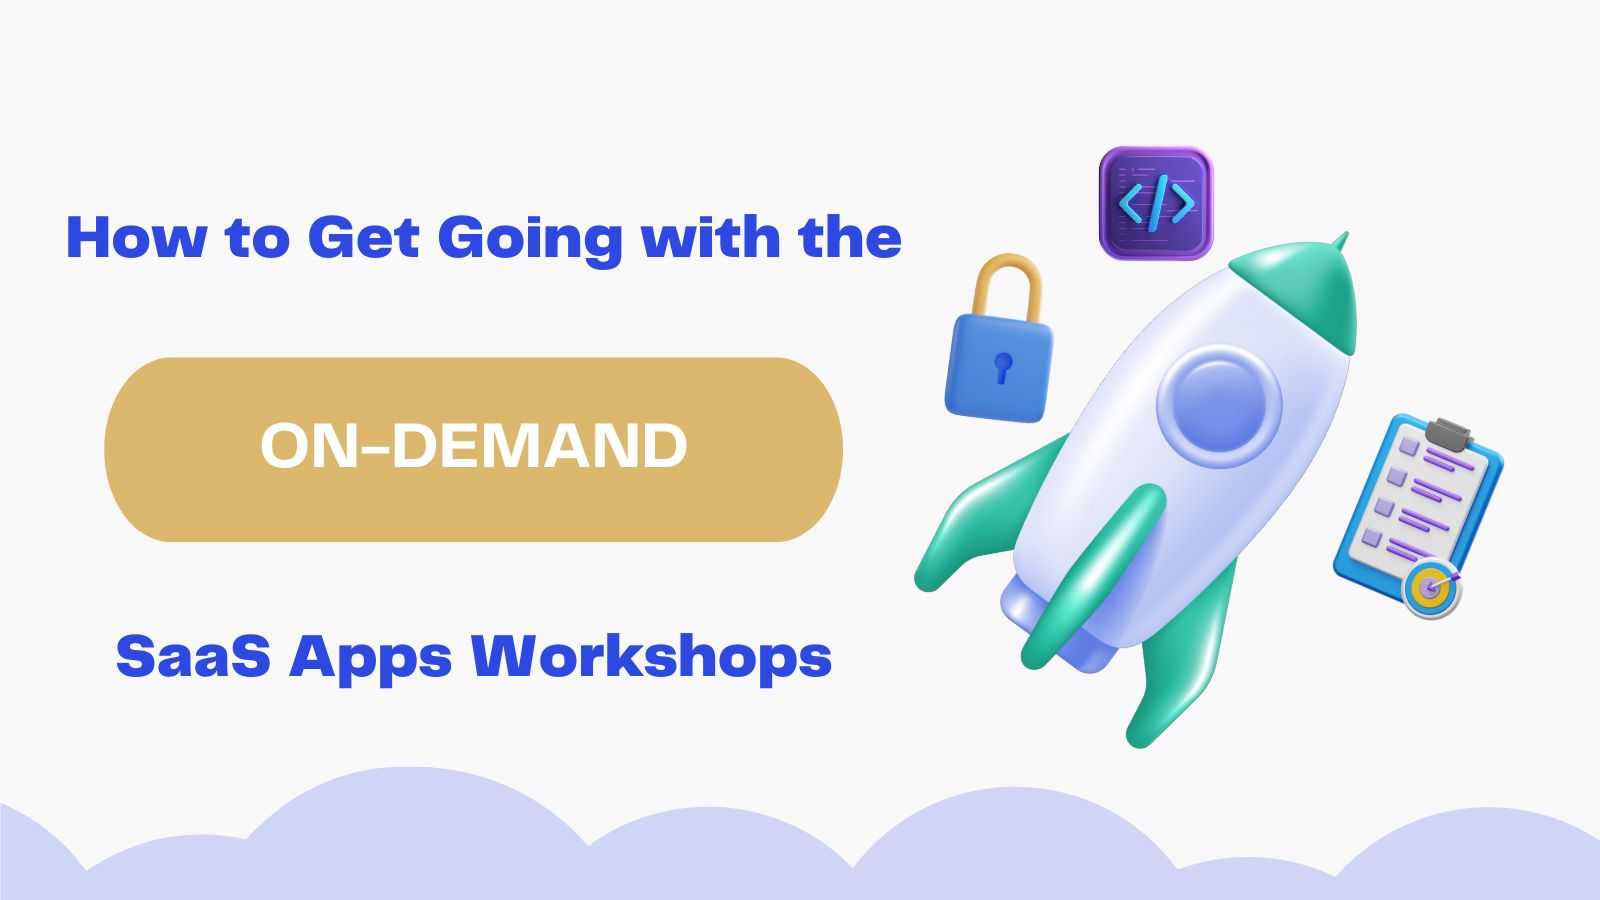 How to Get Going with the On-Demand SaaS Apps Workshops